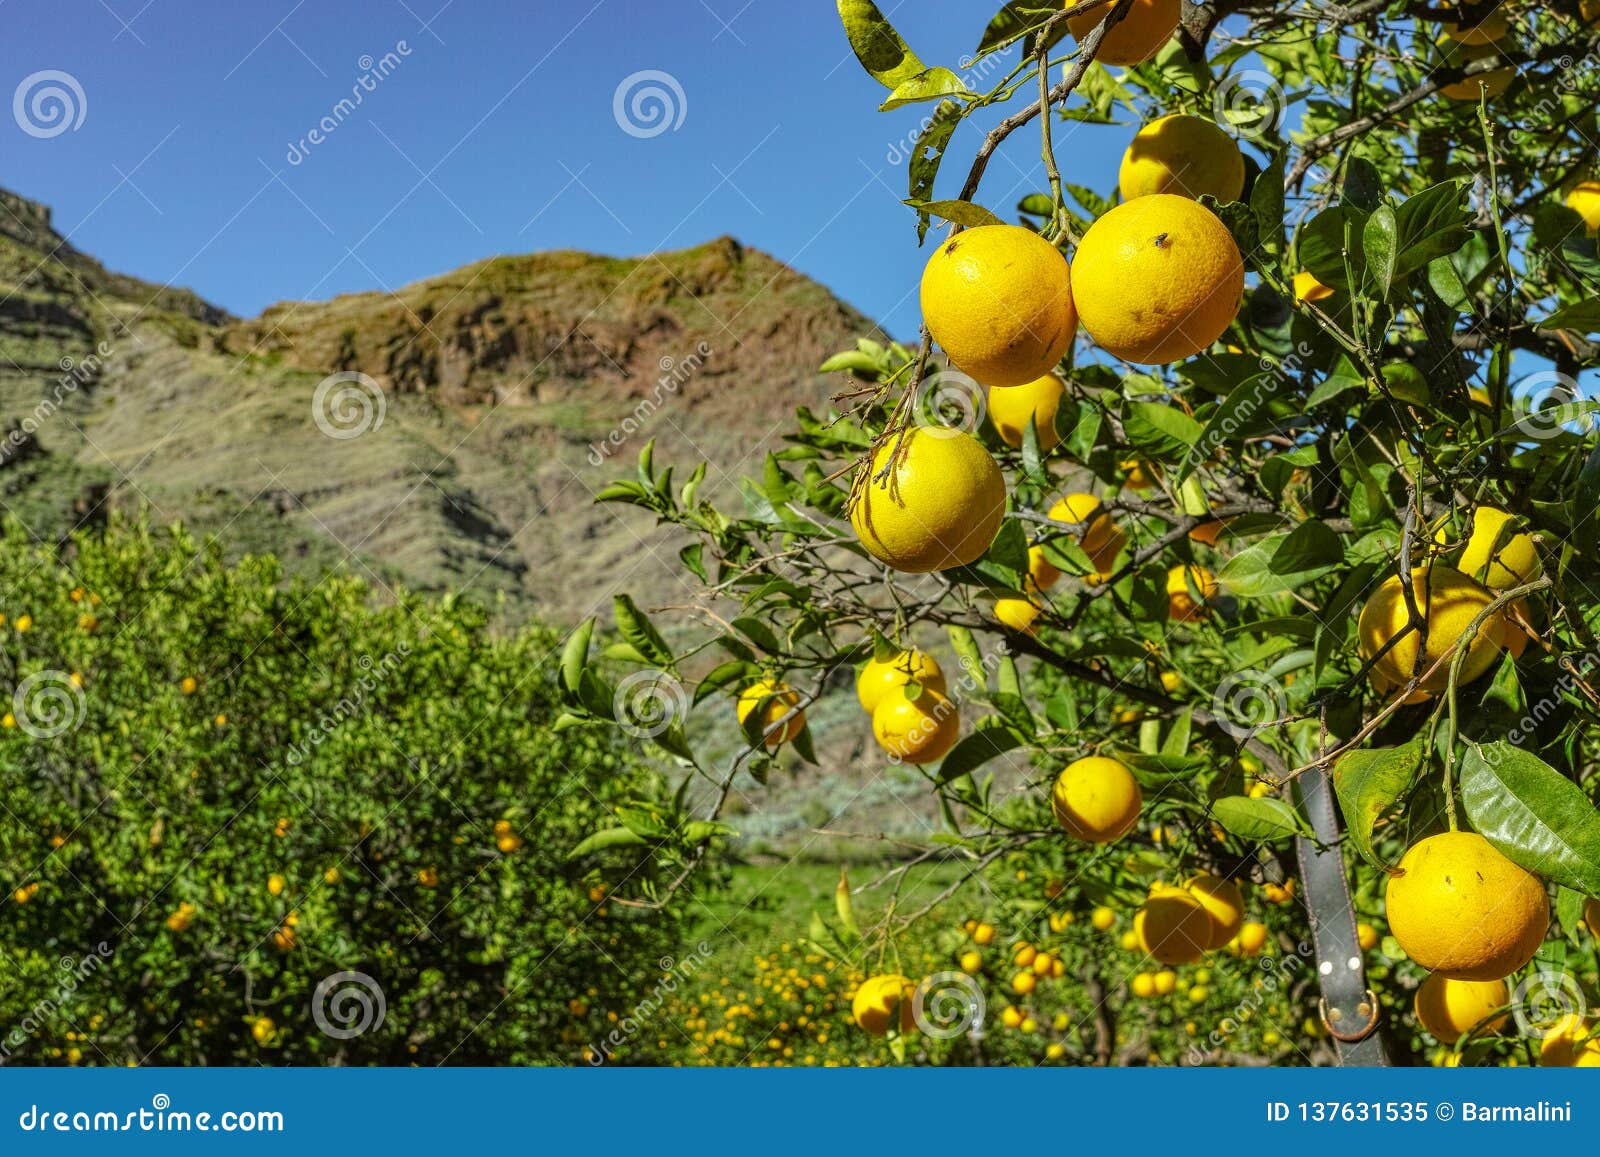 tasty navel oranges plantation with many orange citrus fruits hanging on trees, agaete valley, gran canaria, spain